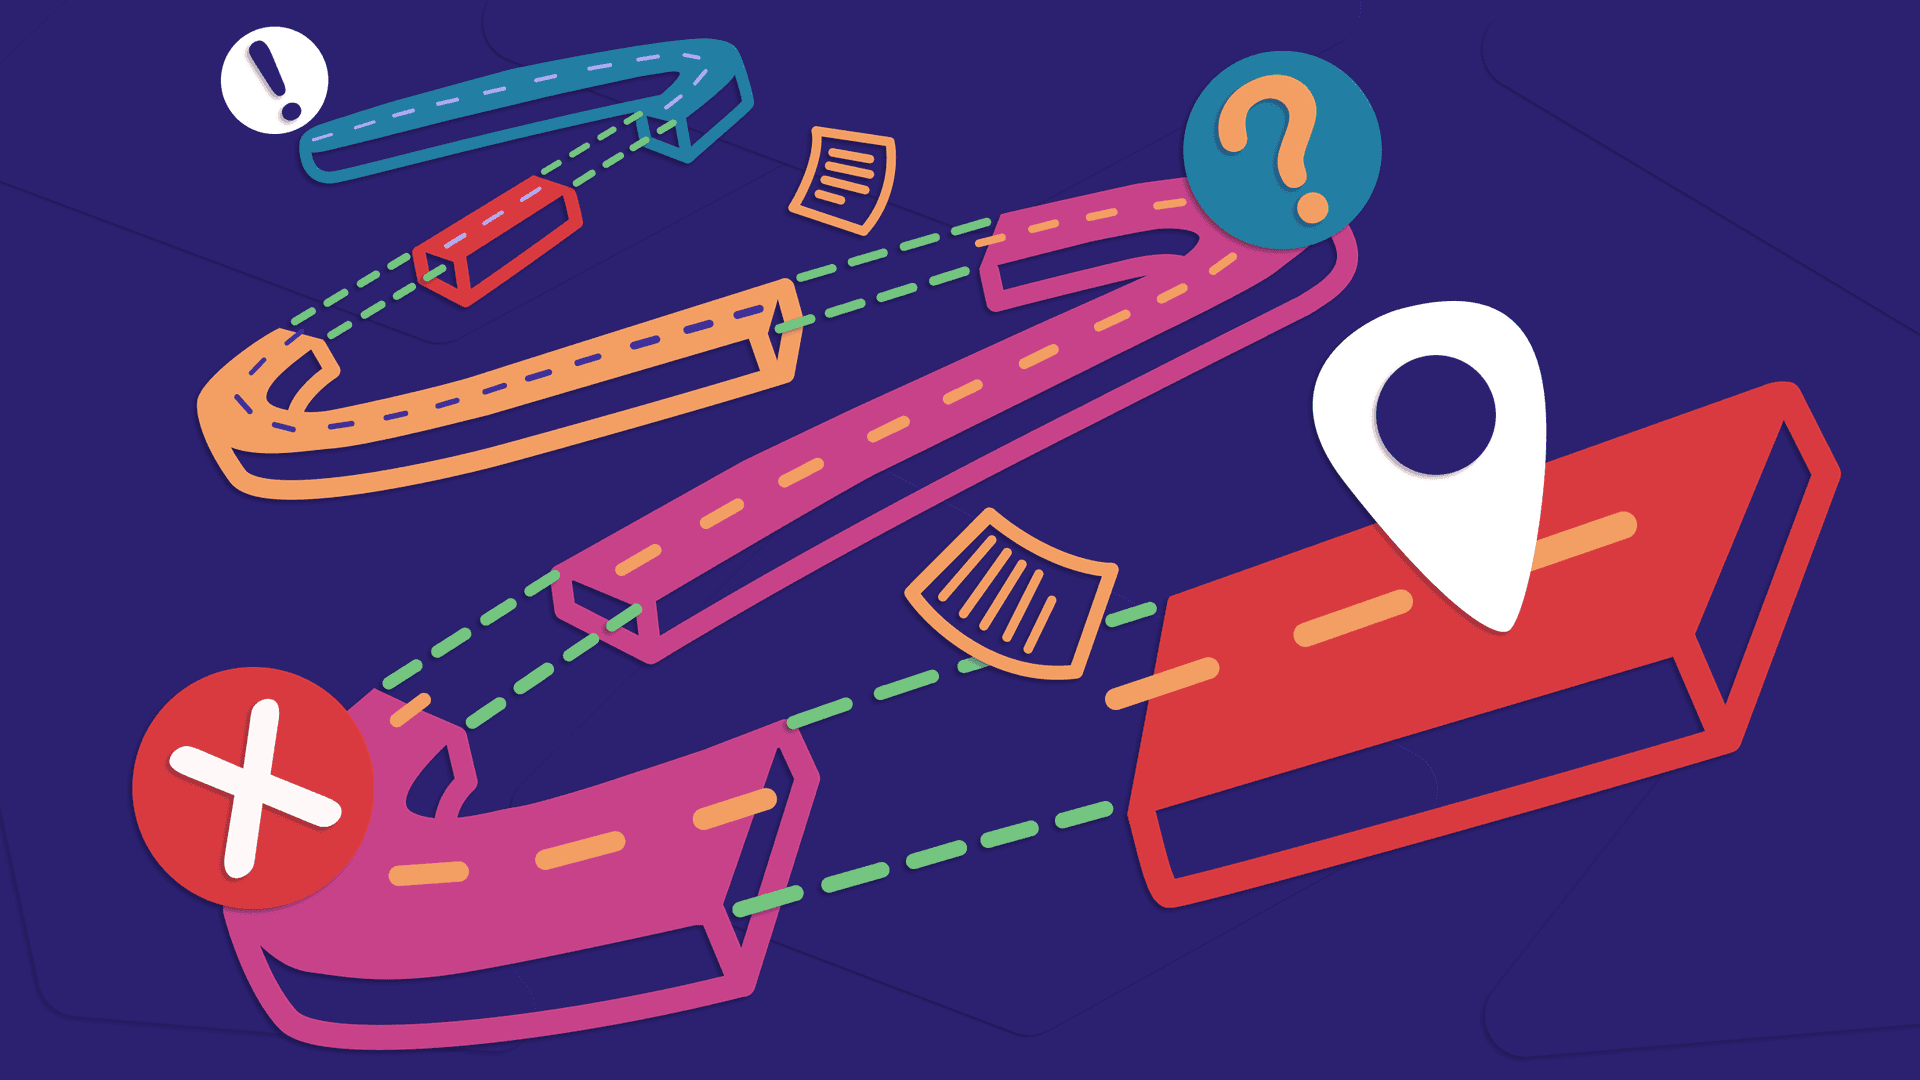 Along a winding doodled road, papers fly around and icons like pins, Xs, question marks pop up.